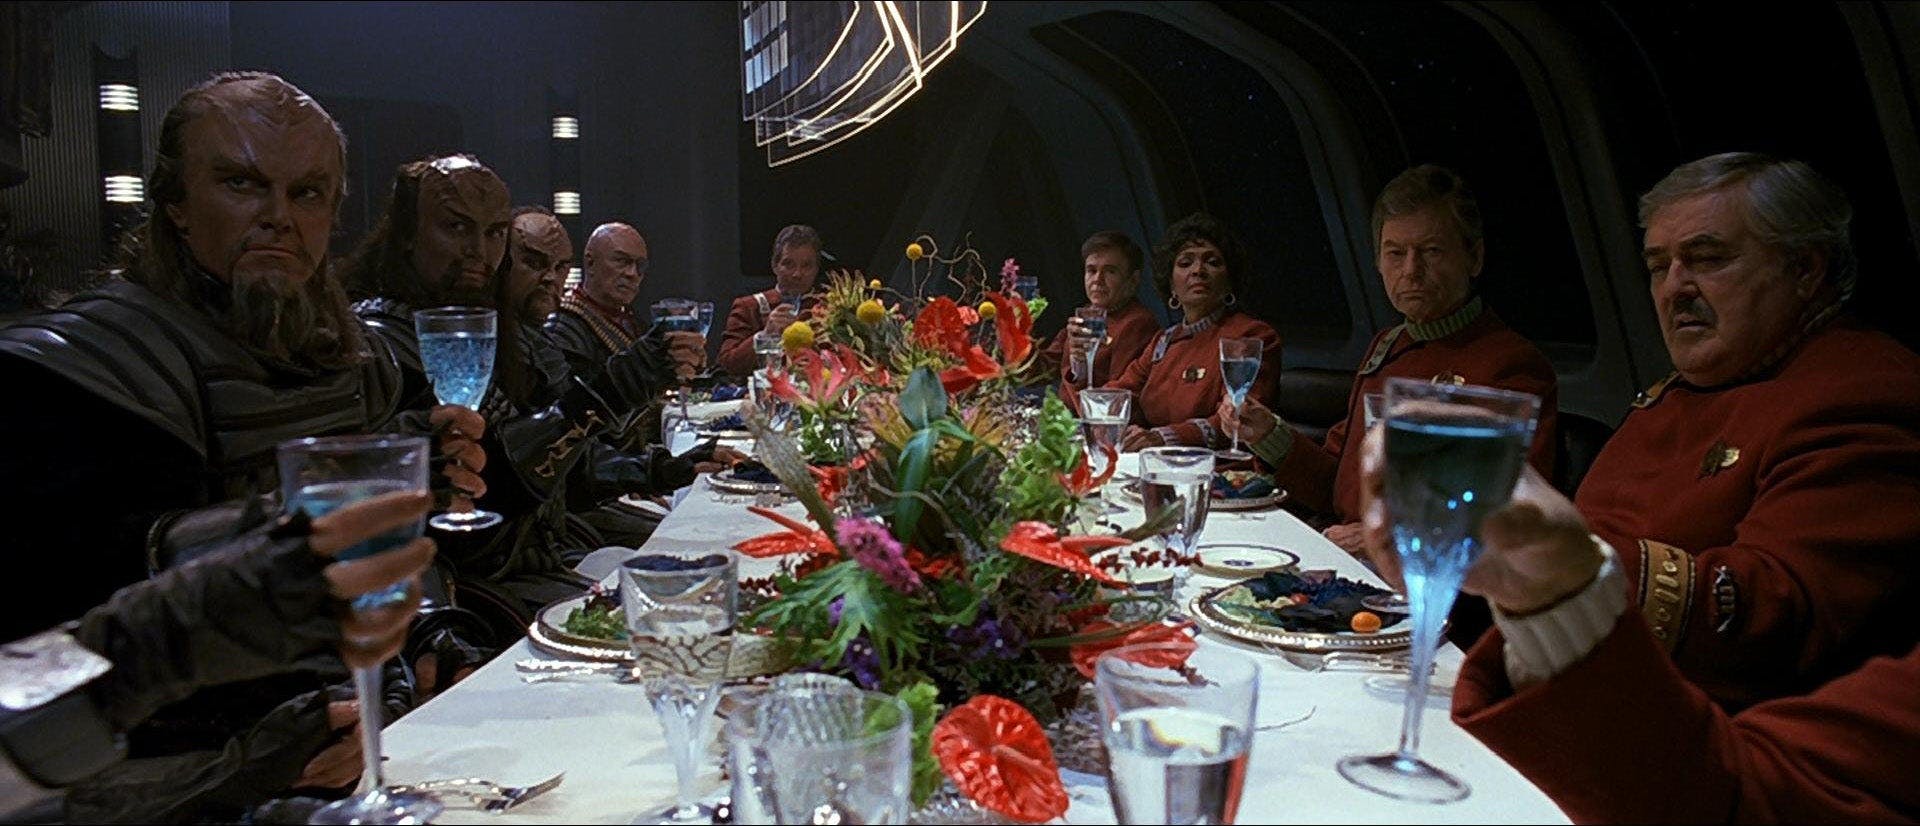 The Klingons and Federation meet over a meal with Gorkon at the head of the table in Star Trek VI: The Undiscovered Country